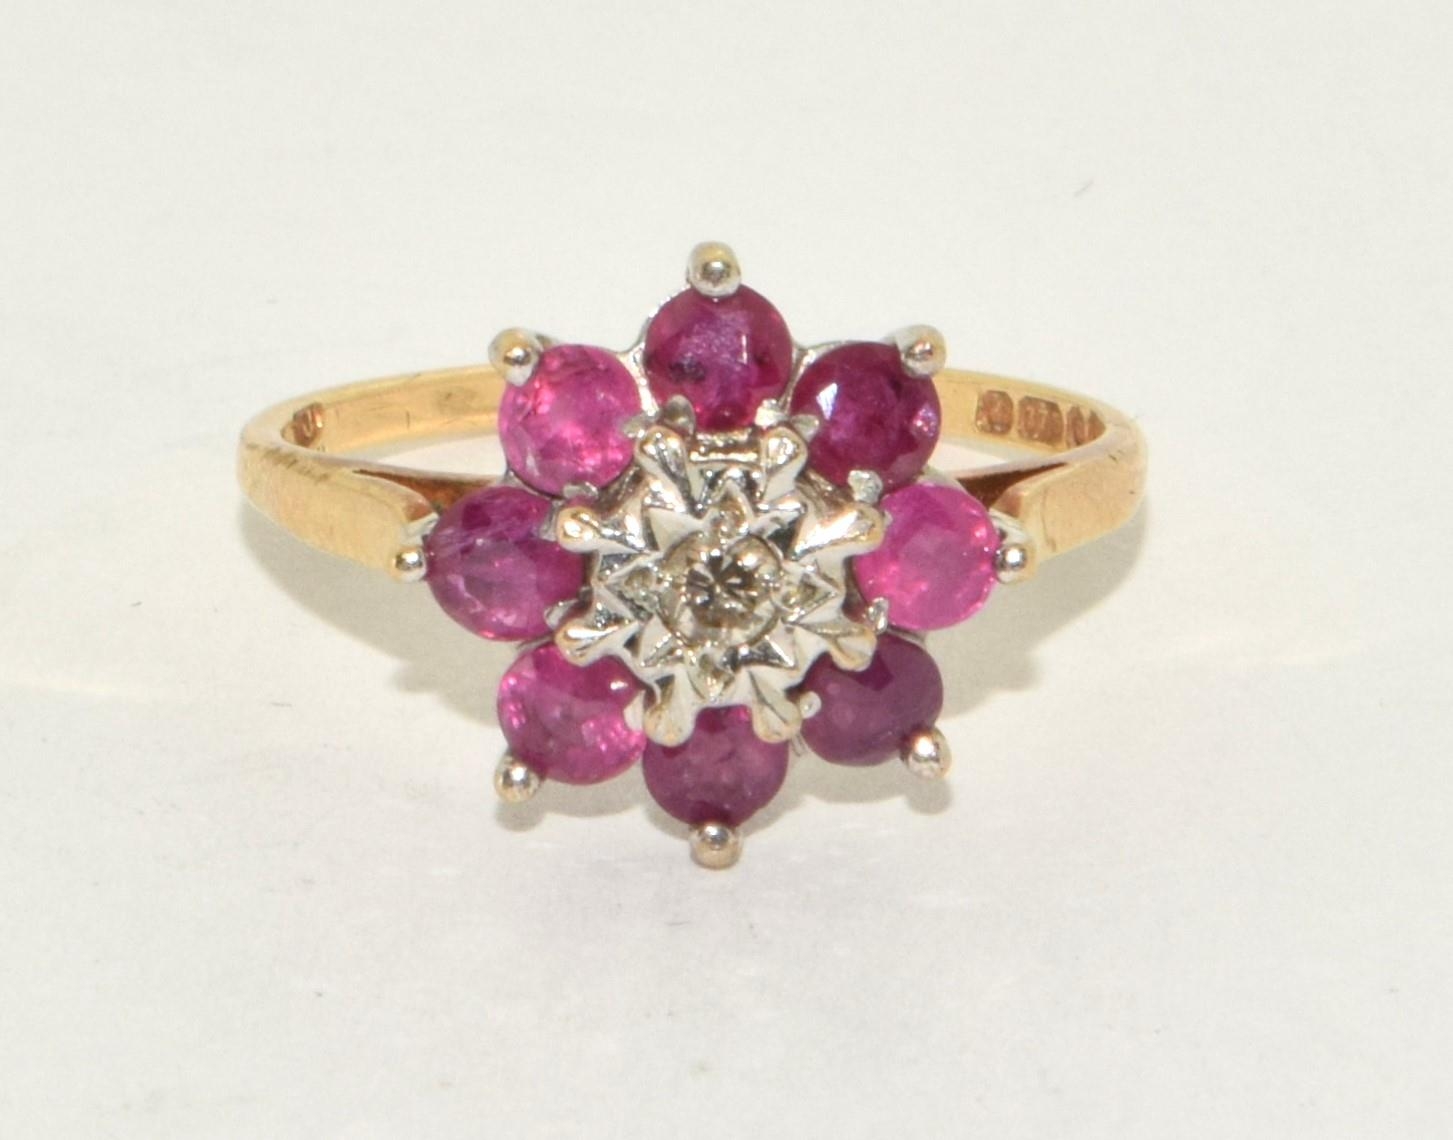 9ct gold ladies antique set Ruby and Diamond cluster ring size M - Image 5 of 5